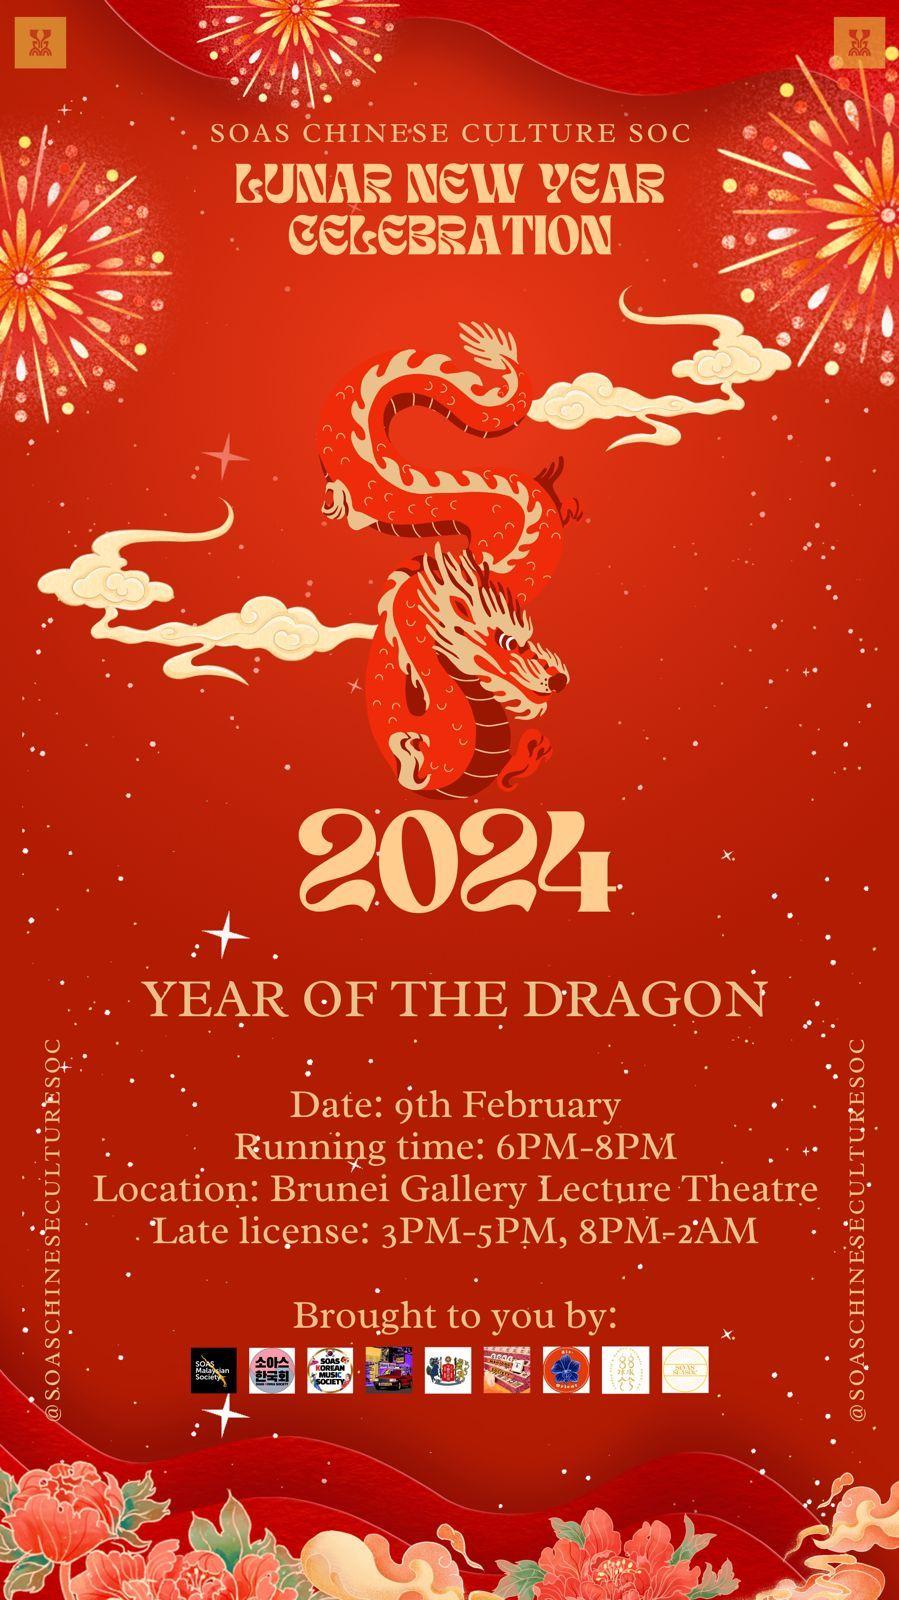 Lunar New Year Late Licence 9th Feb, 8pm-2am